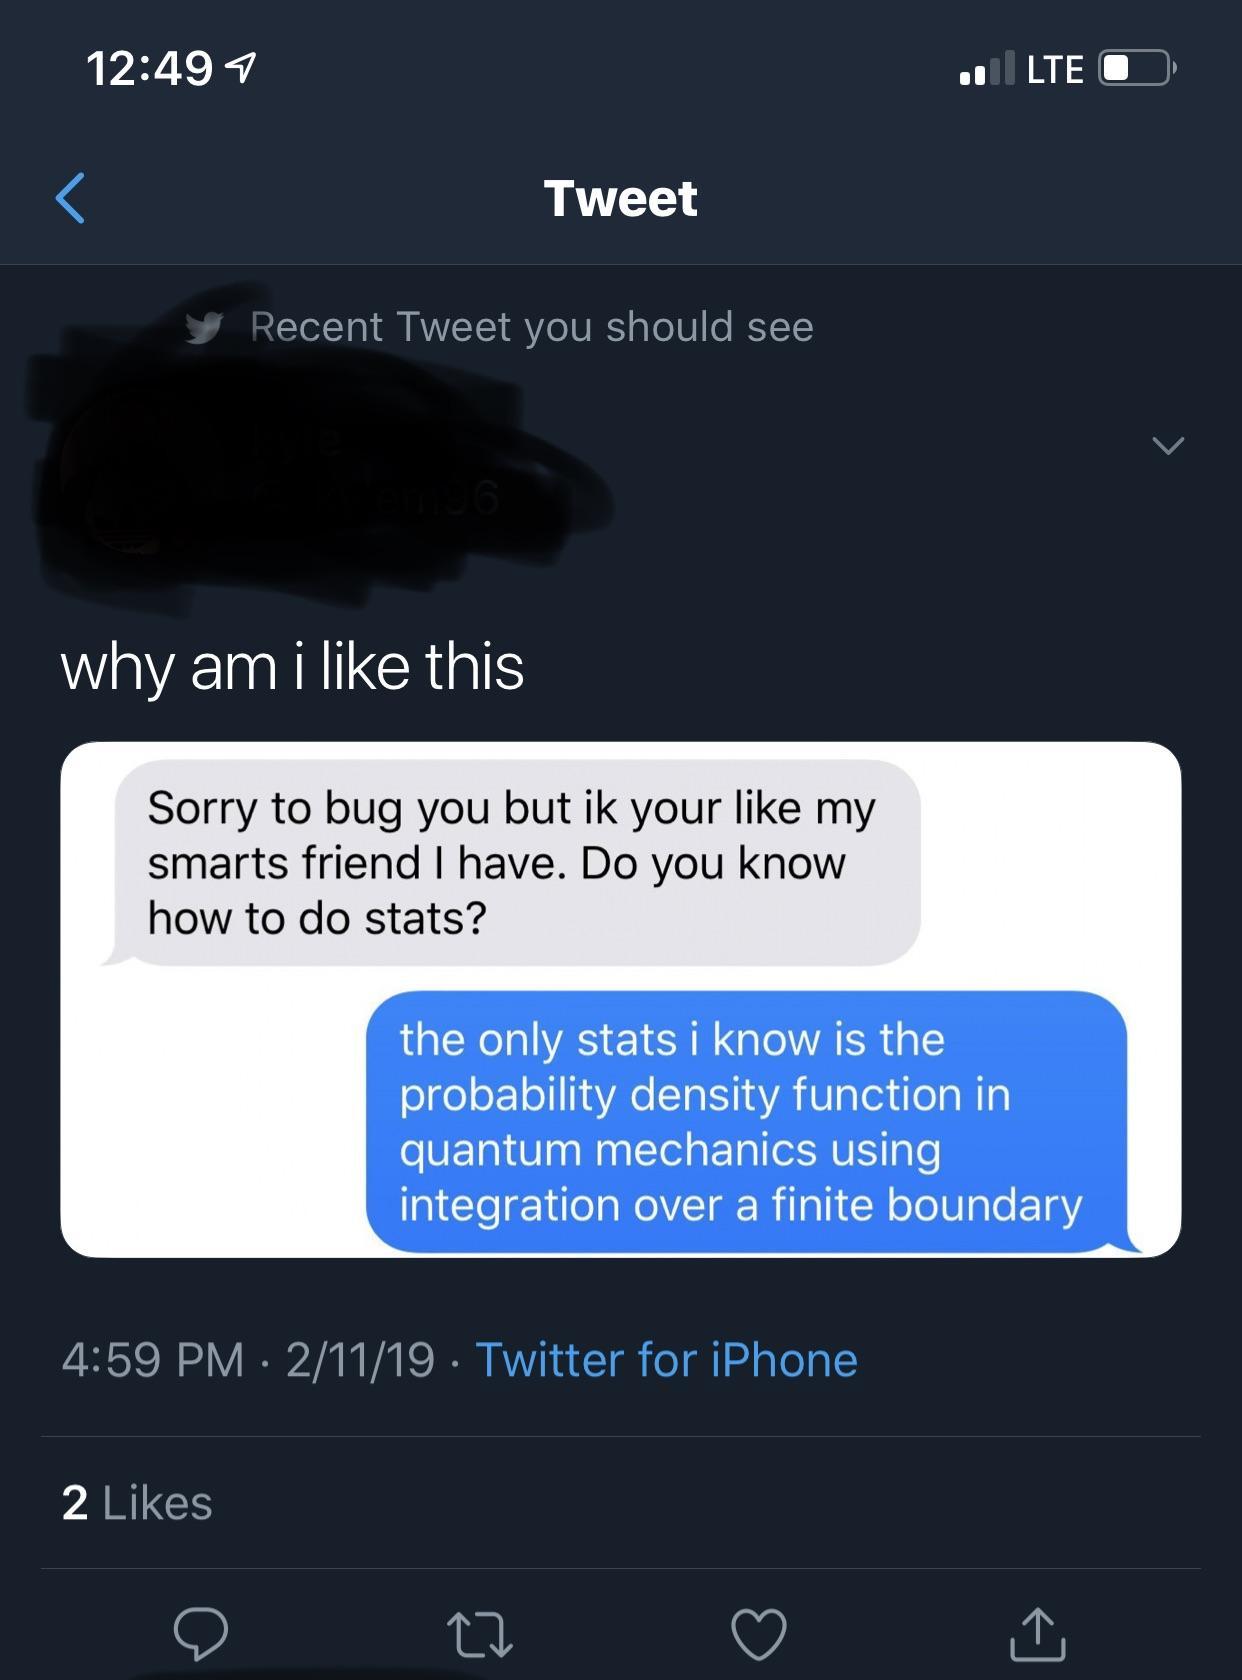 screenshot - 1 .|Lte O Tweet Recent Tweet you should see why am i this Sorry to bug you but ik your my smarts friend I have. Do you know how to do stats? the only stats i know is the probability density function in quantum mechanics using integration over